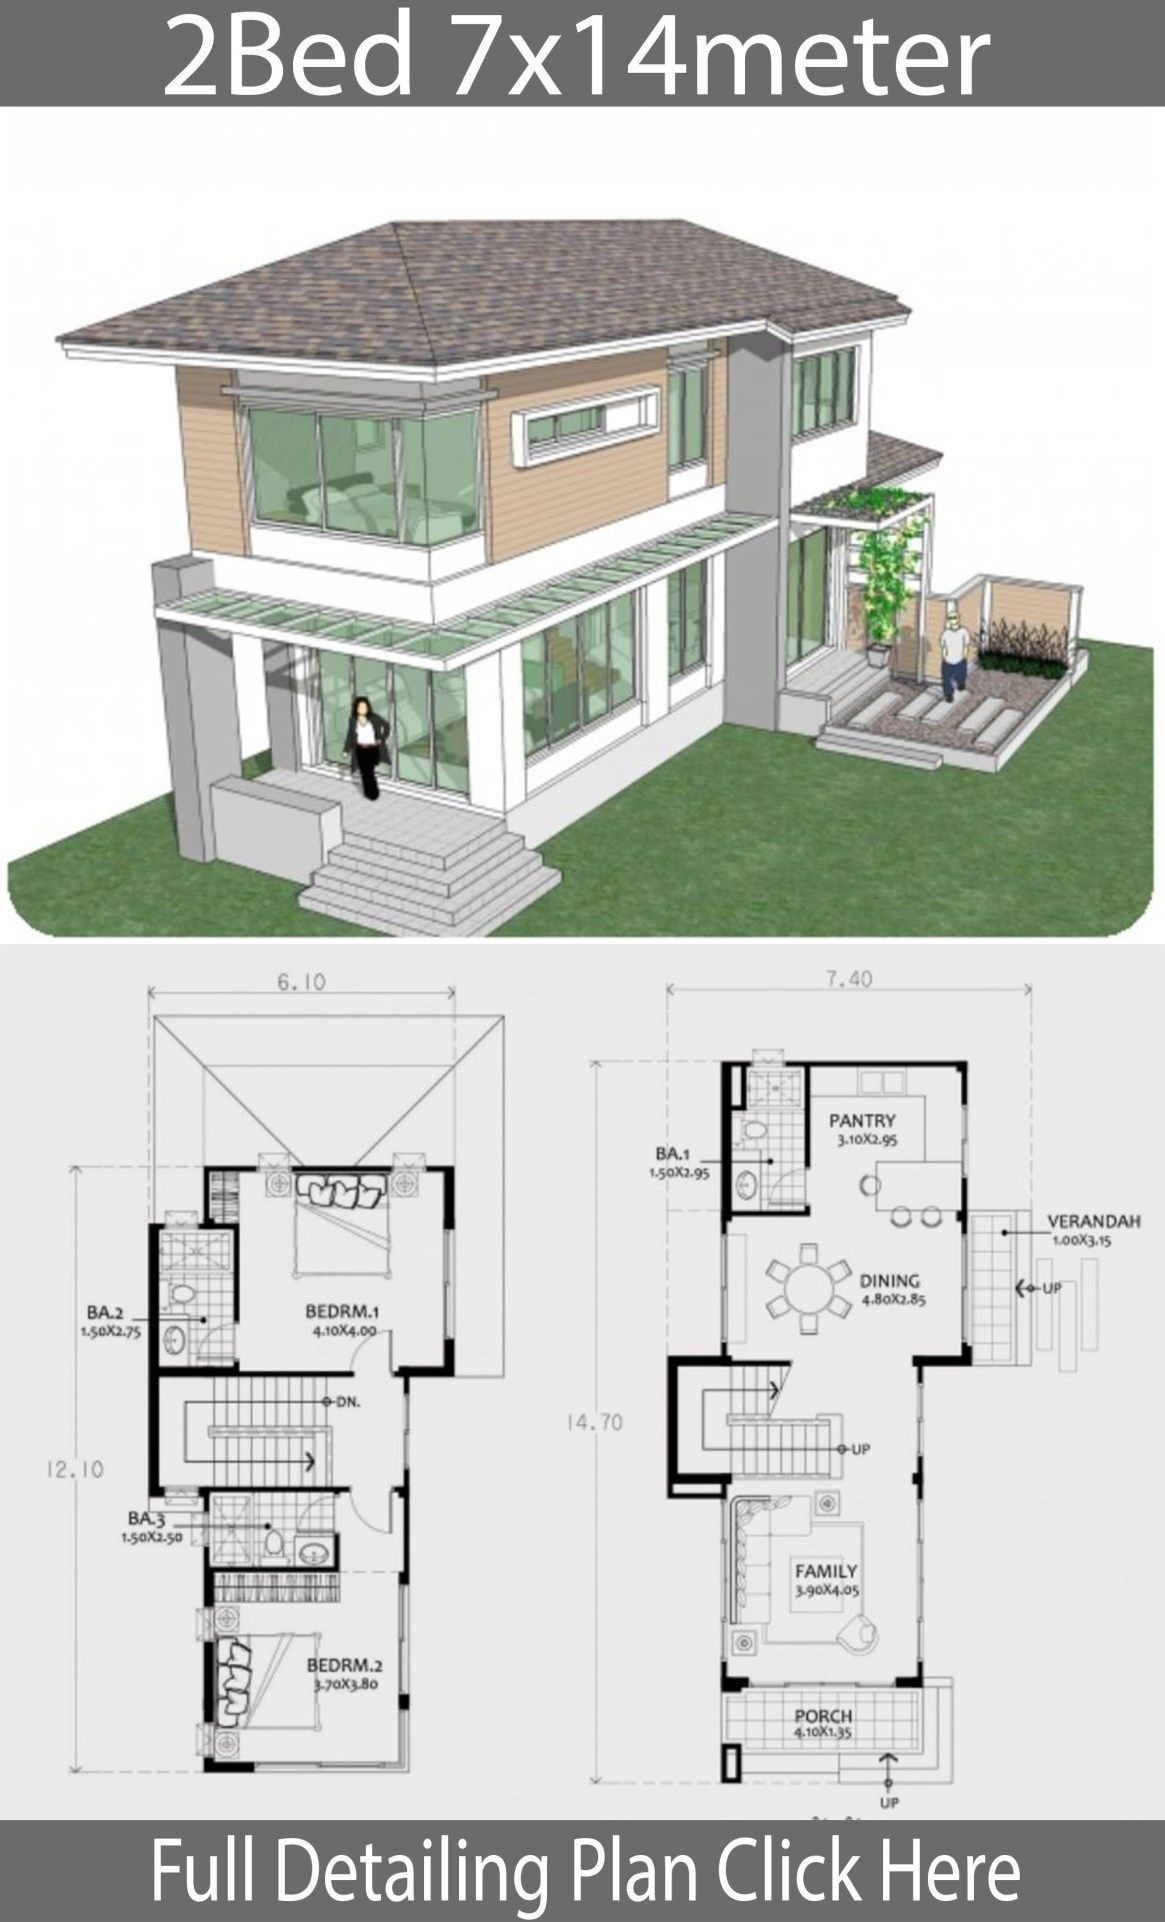 Marvelous modern two storey house designs 2020 | two story house design, house within floor plan 2 storey